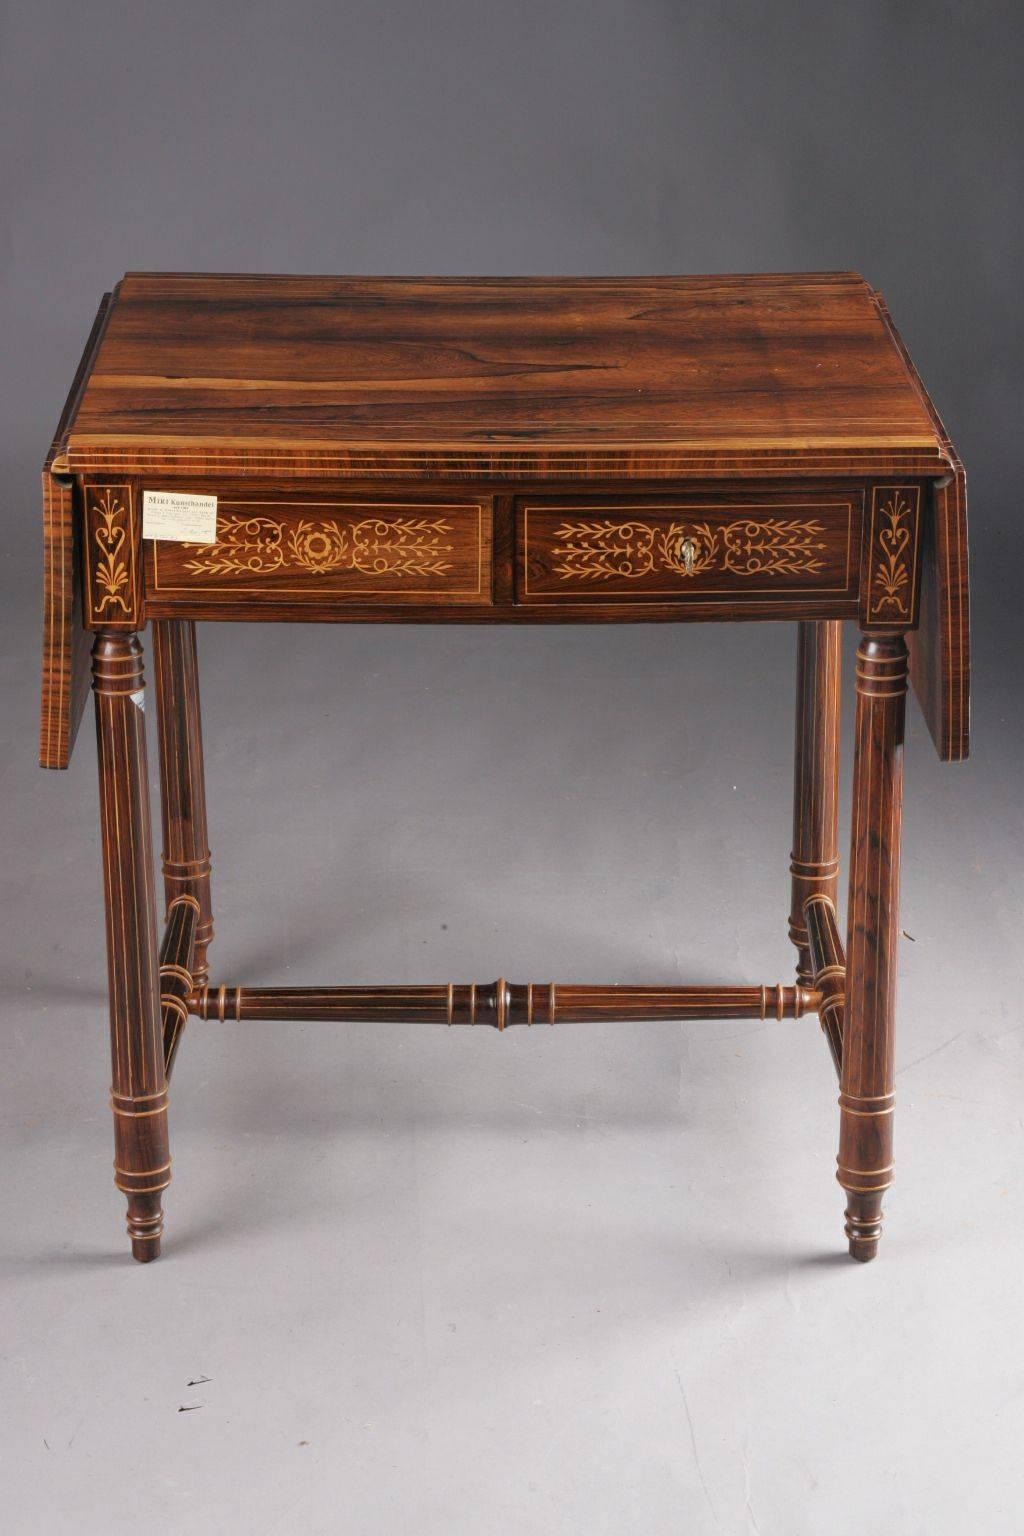 Unique Biedermeier folding table, circa 1830.
Veneer on solid wood. Veneer framed in thread and stripes. Turned on both sides turned columns in column. Foldable tabletop on both sides. Two-bar frame base with inlaid leaf decoration. The entire